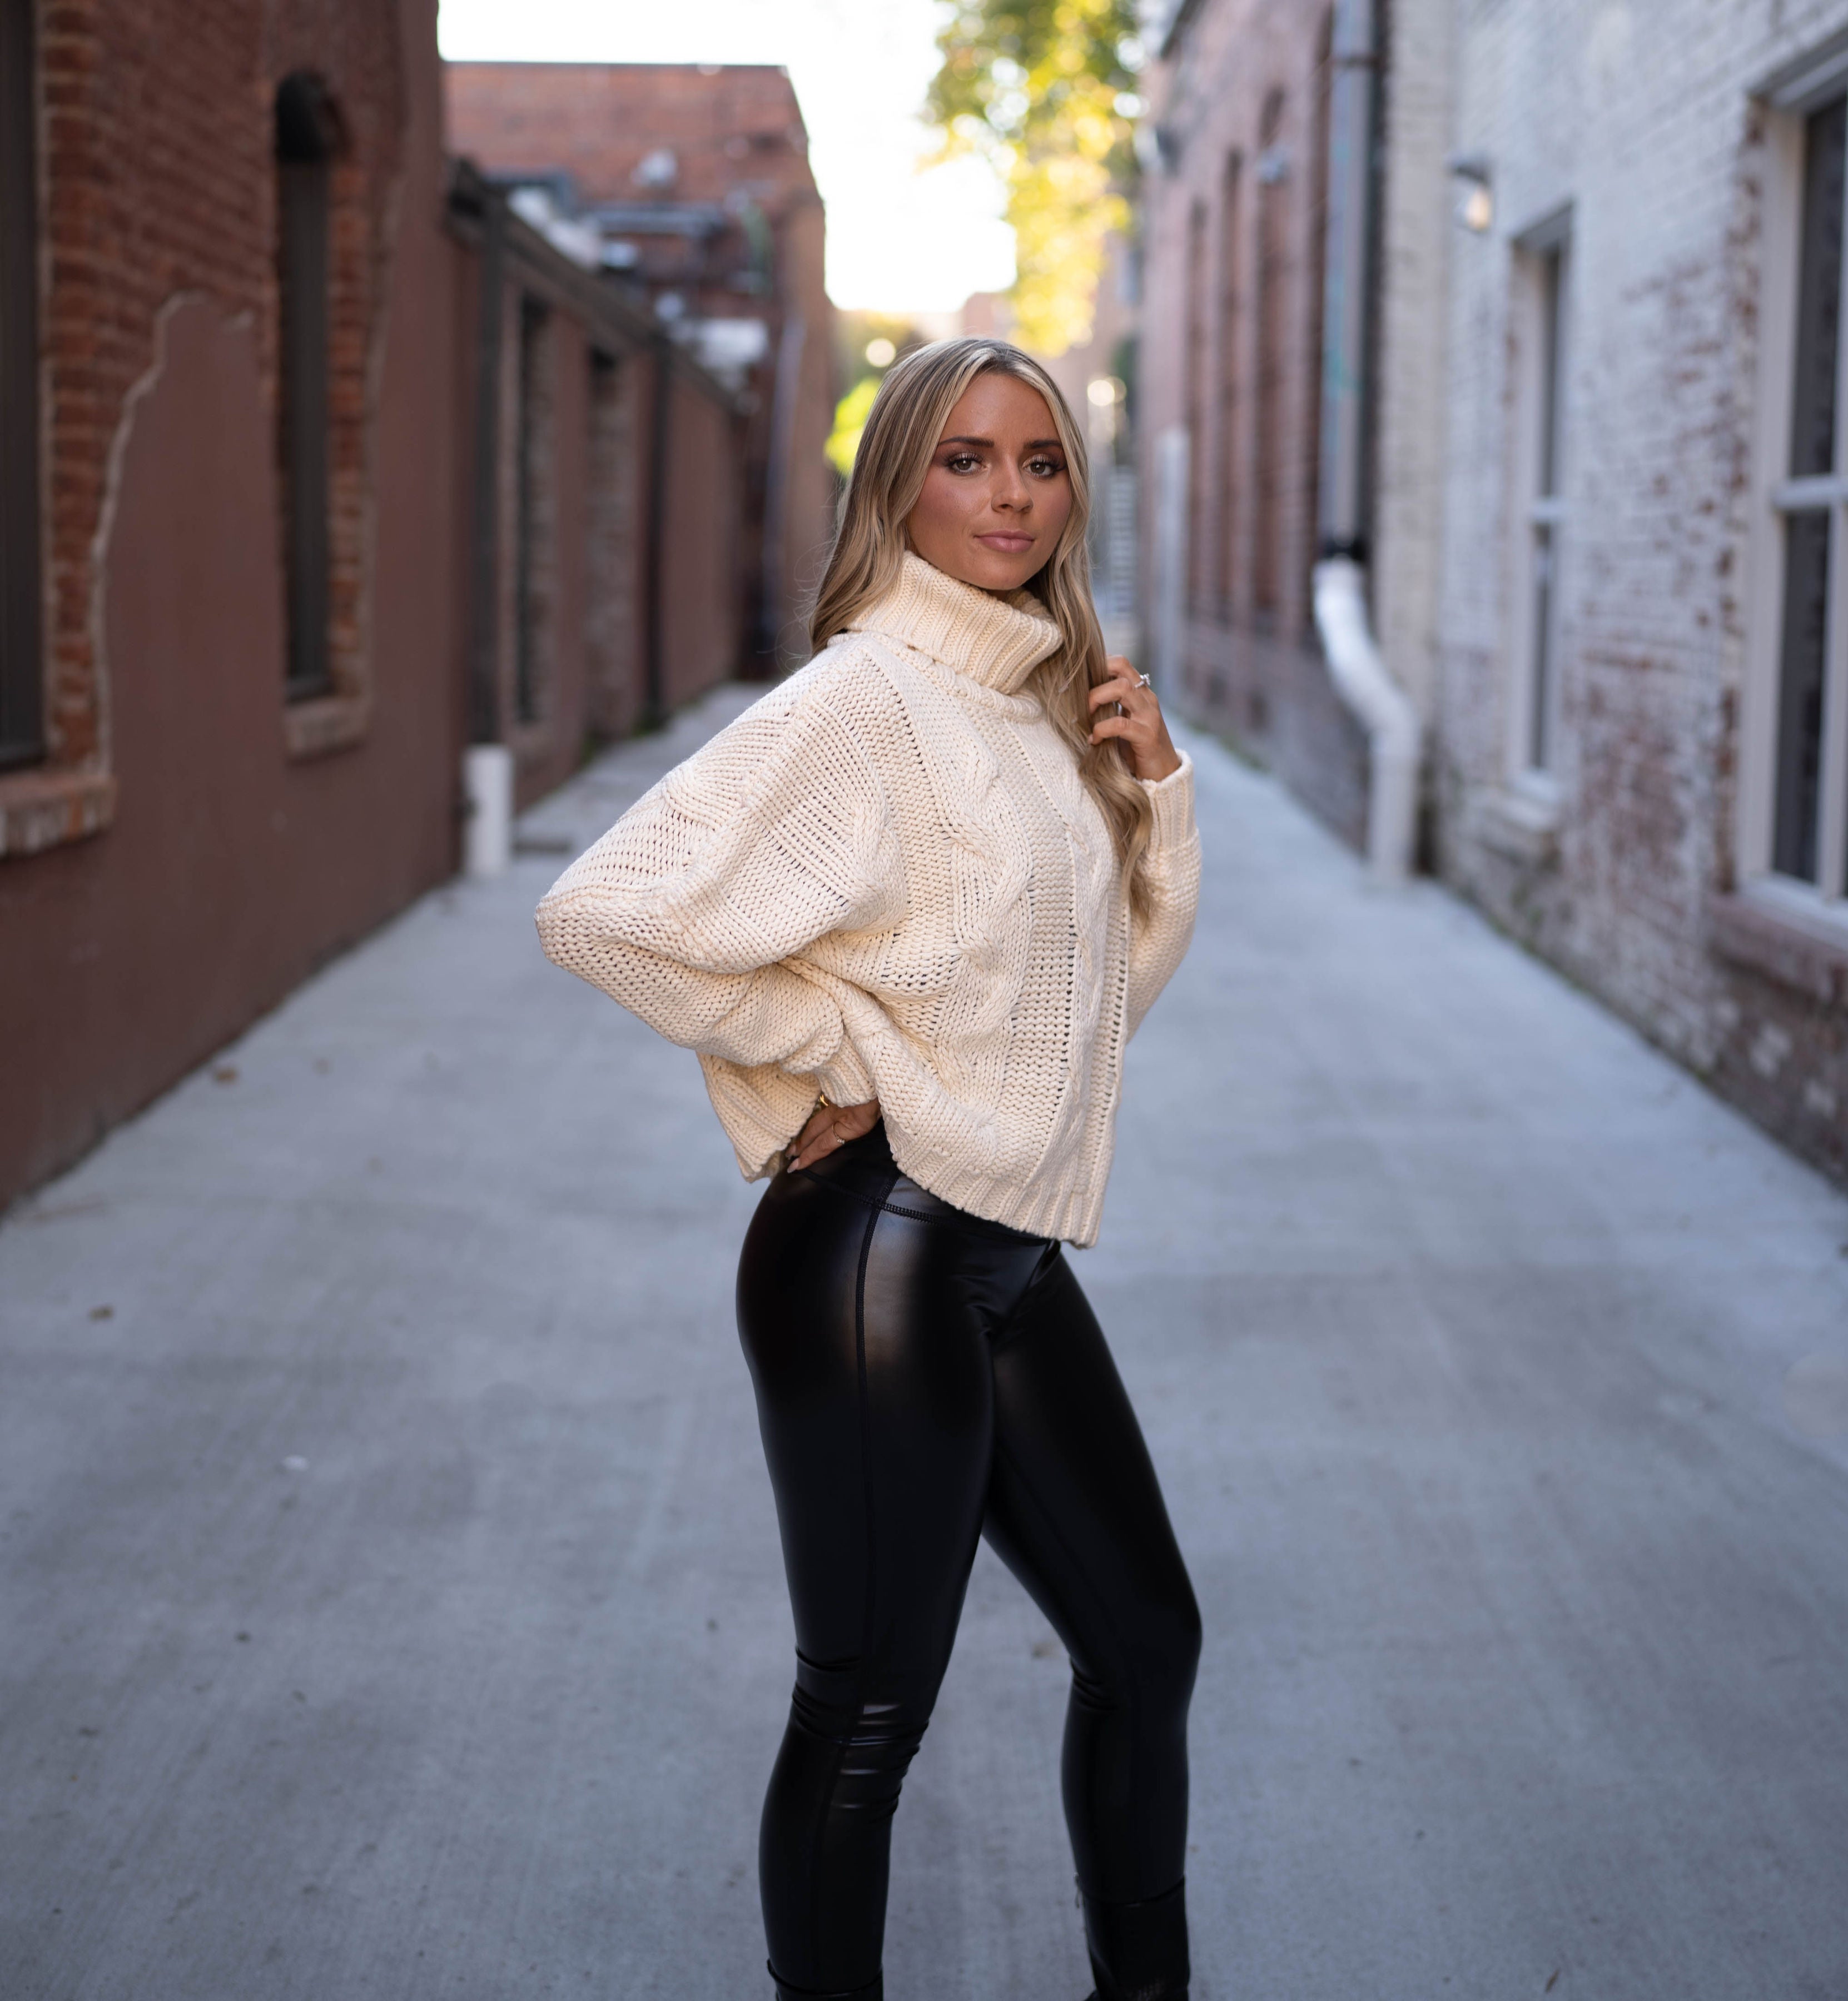 The One You Want Faux Leather Leggings